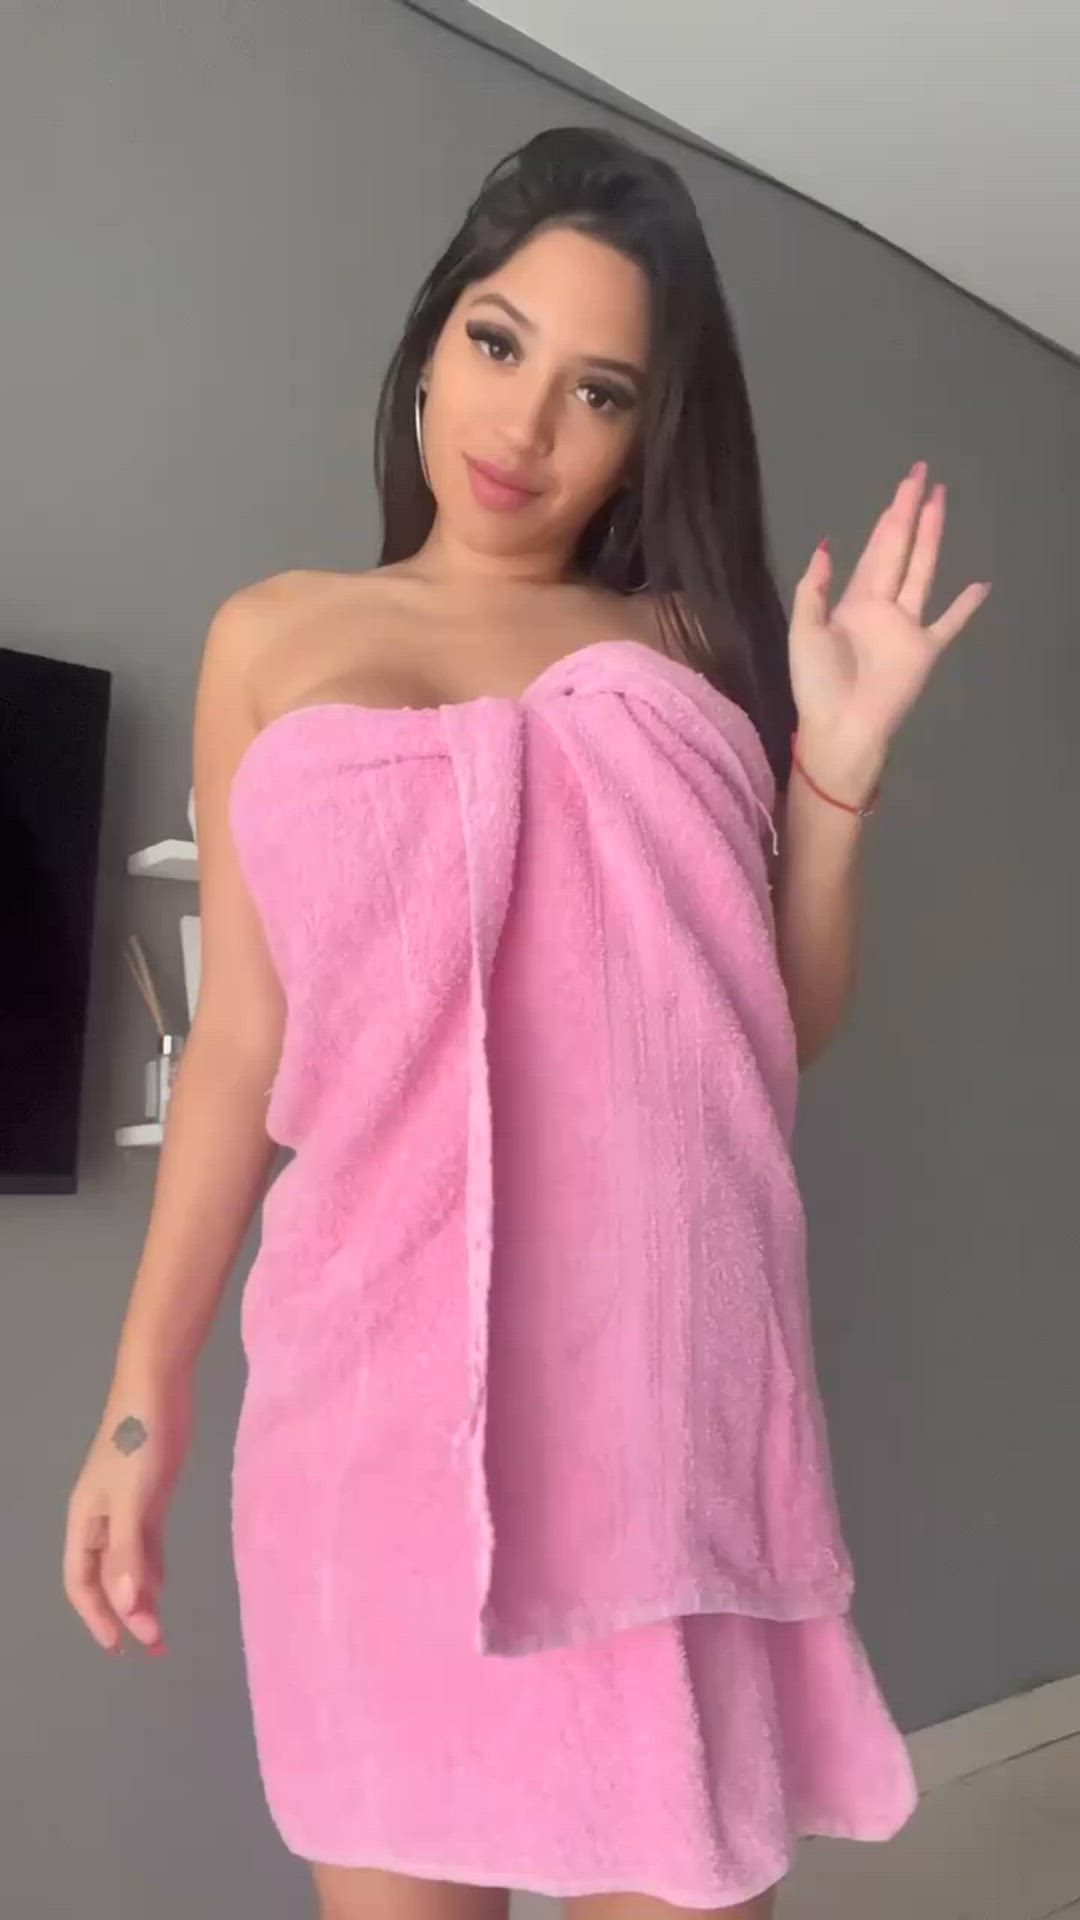 Tits porn video with onlyfans model plzfckmehrd <strong>@paulaa2001</strong>